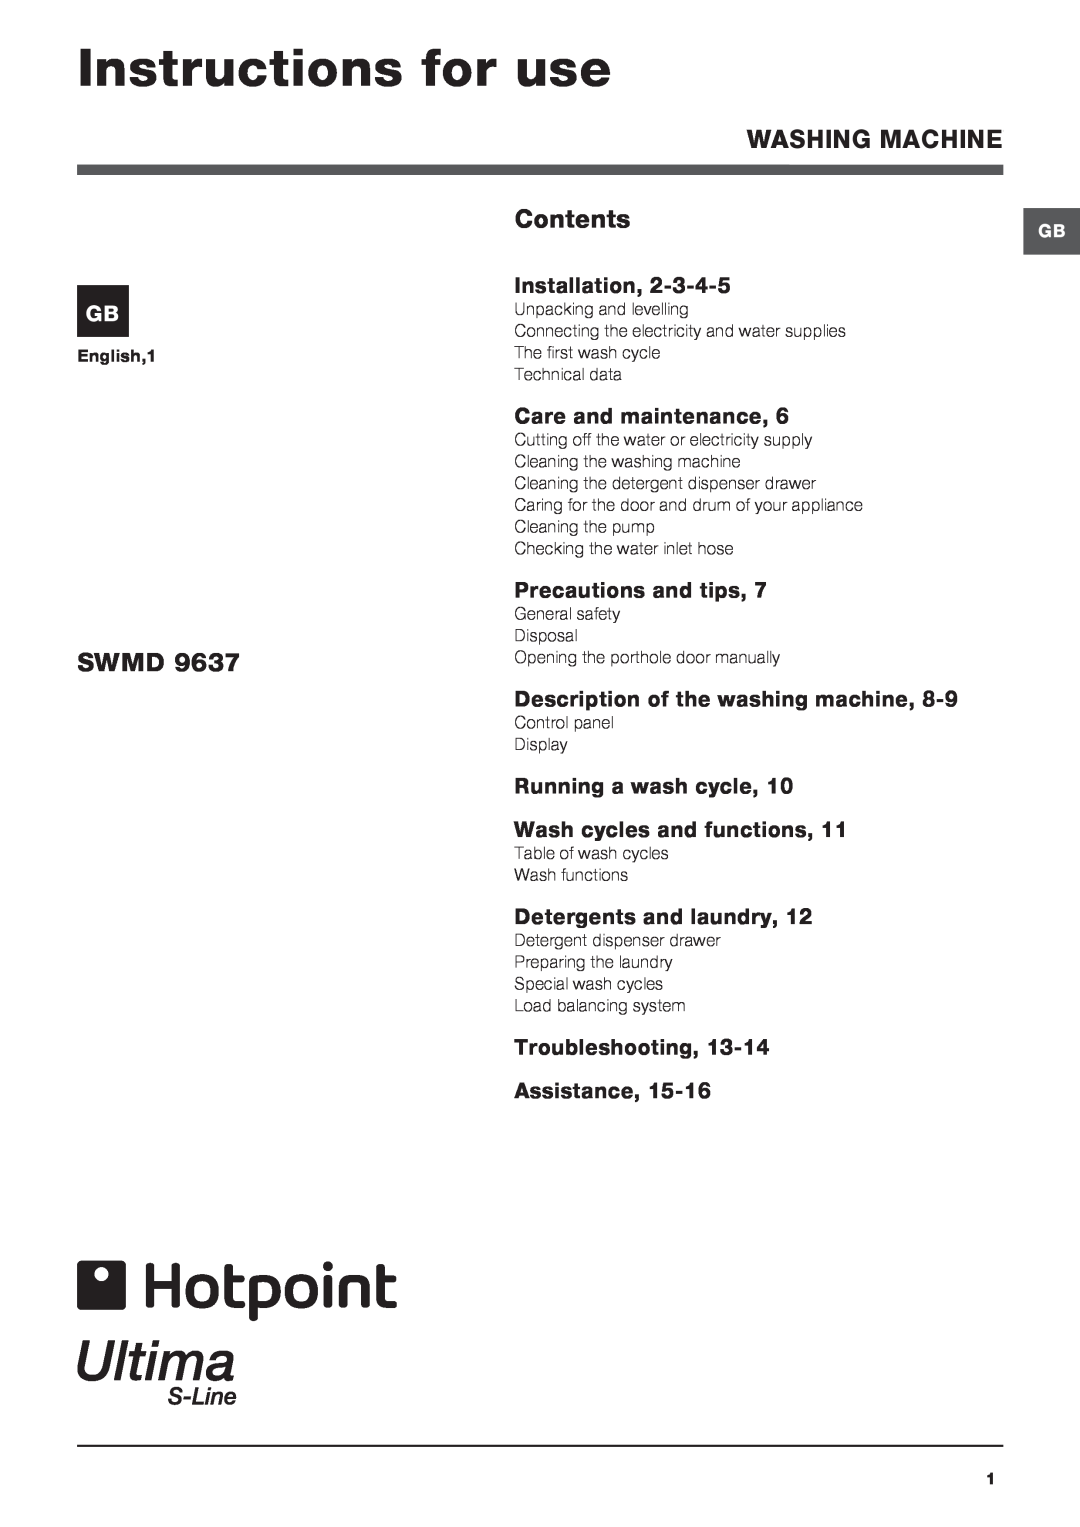 Hotpoint ULTIMA manual Instructions for Installation and Use, Troubleshooting inside 